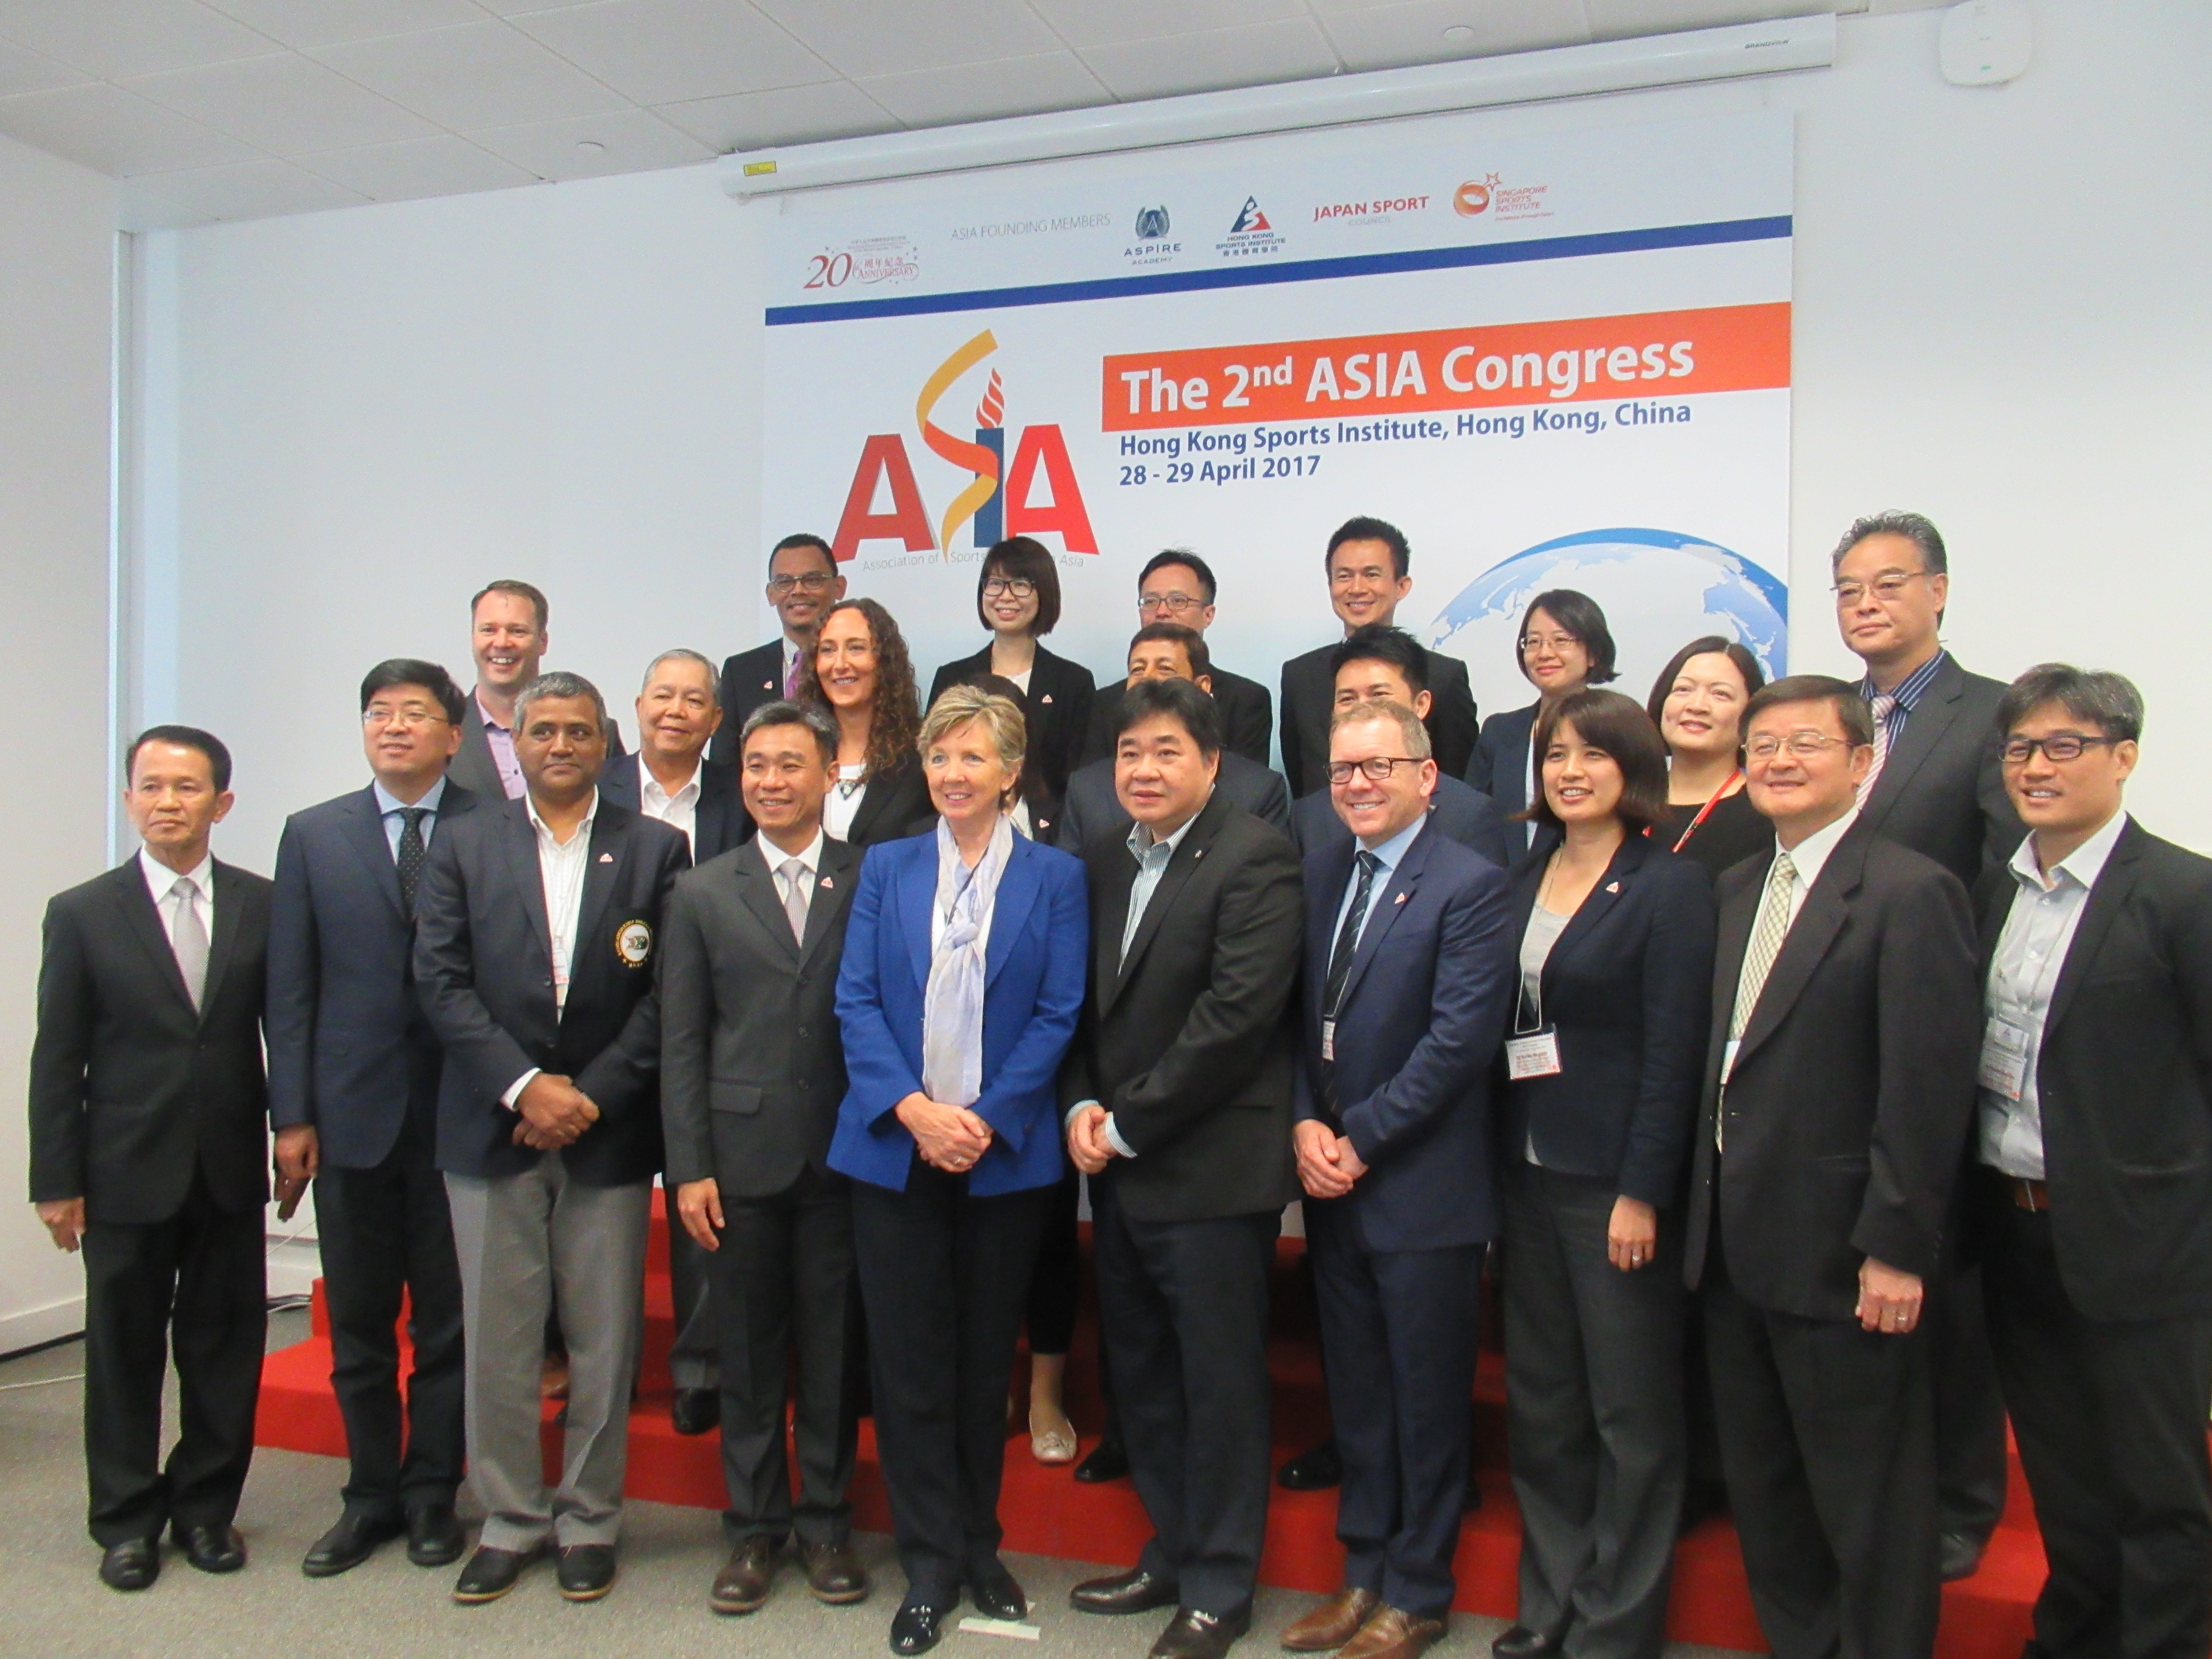 Group photo for the 2nd congress of Association of Sports Institutes in Asia